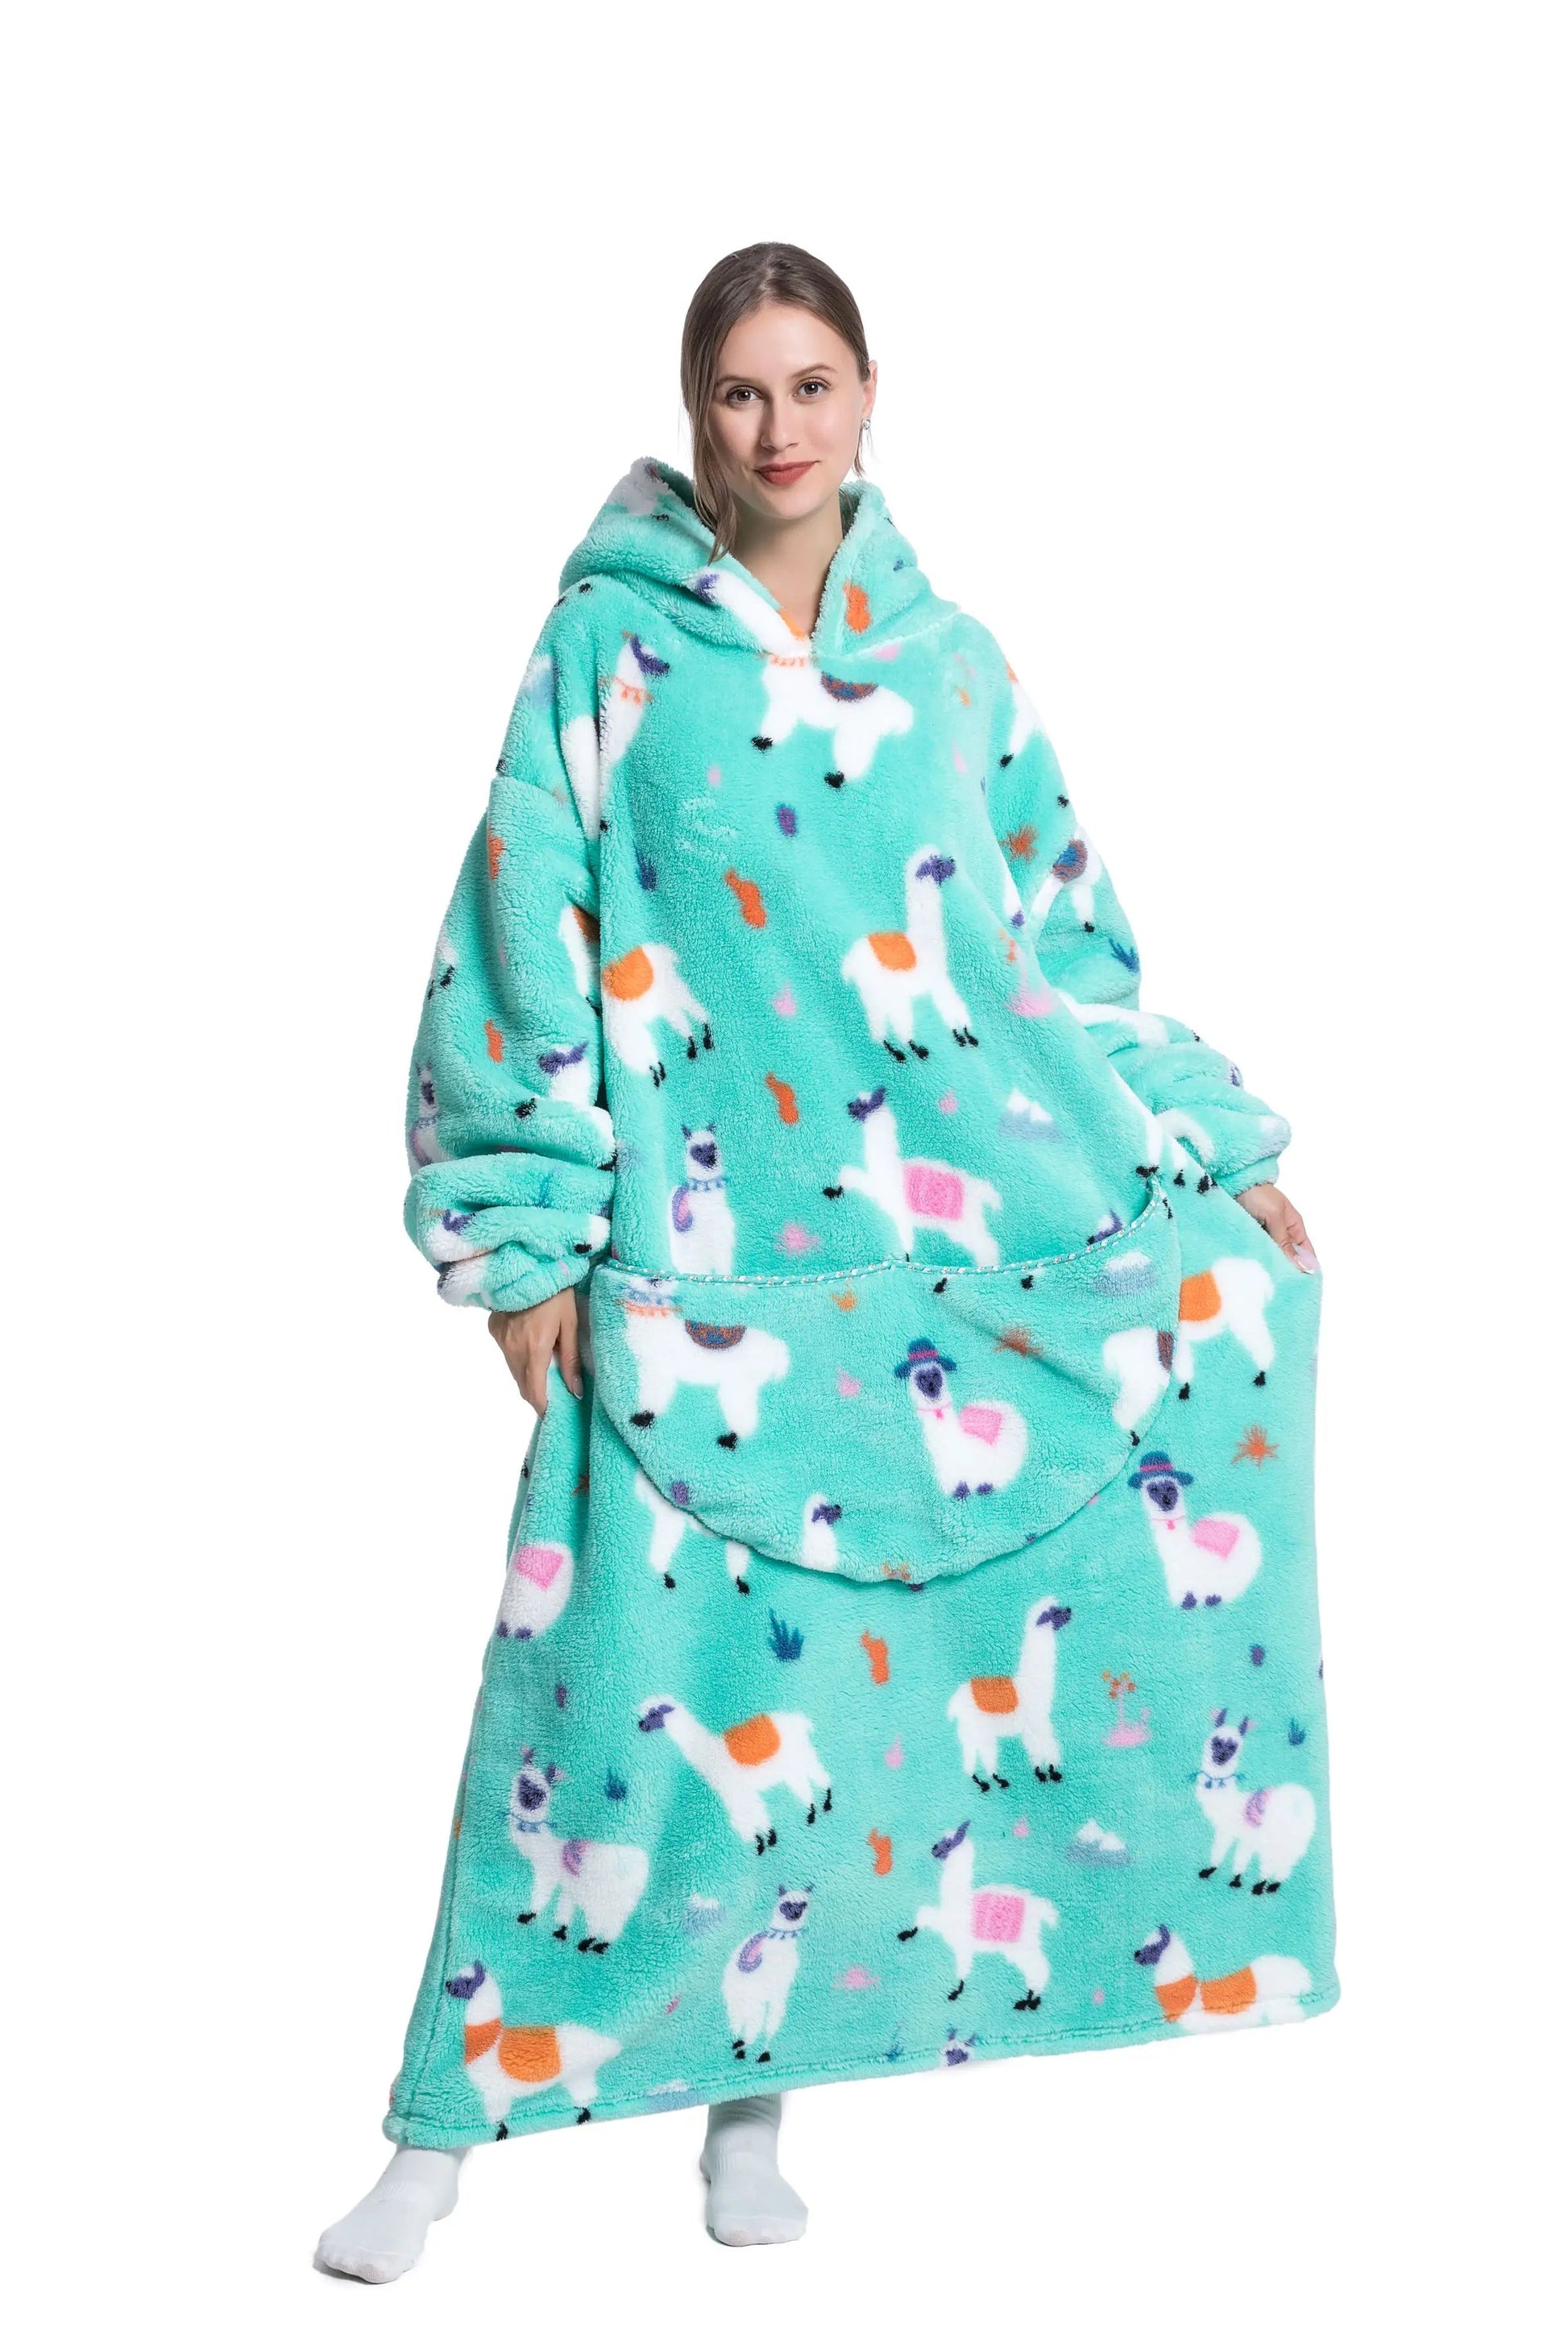 Comfy Wearable Oversized Hoodie Adult Kids Toddles Blanket_ – JeHouze.US